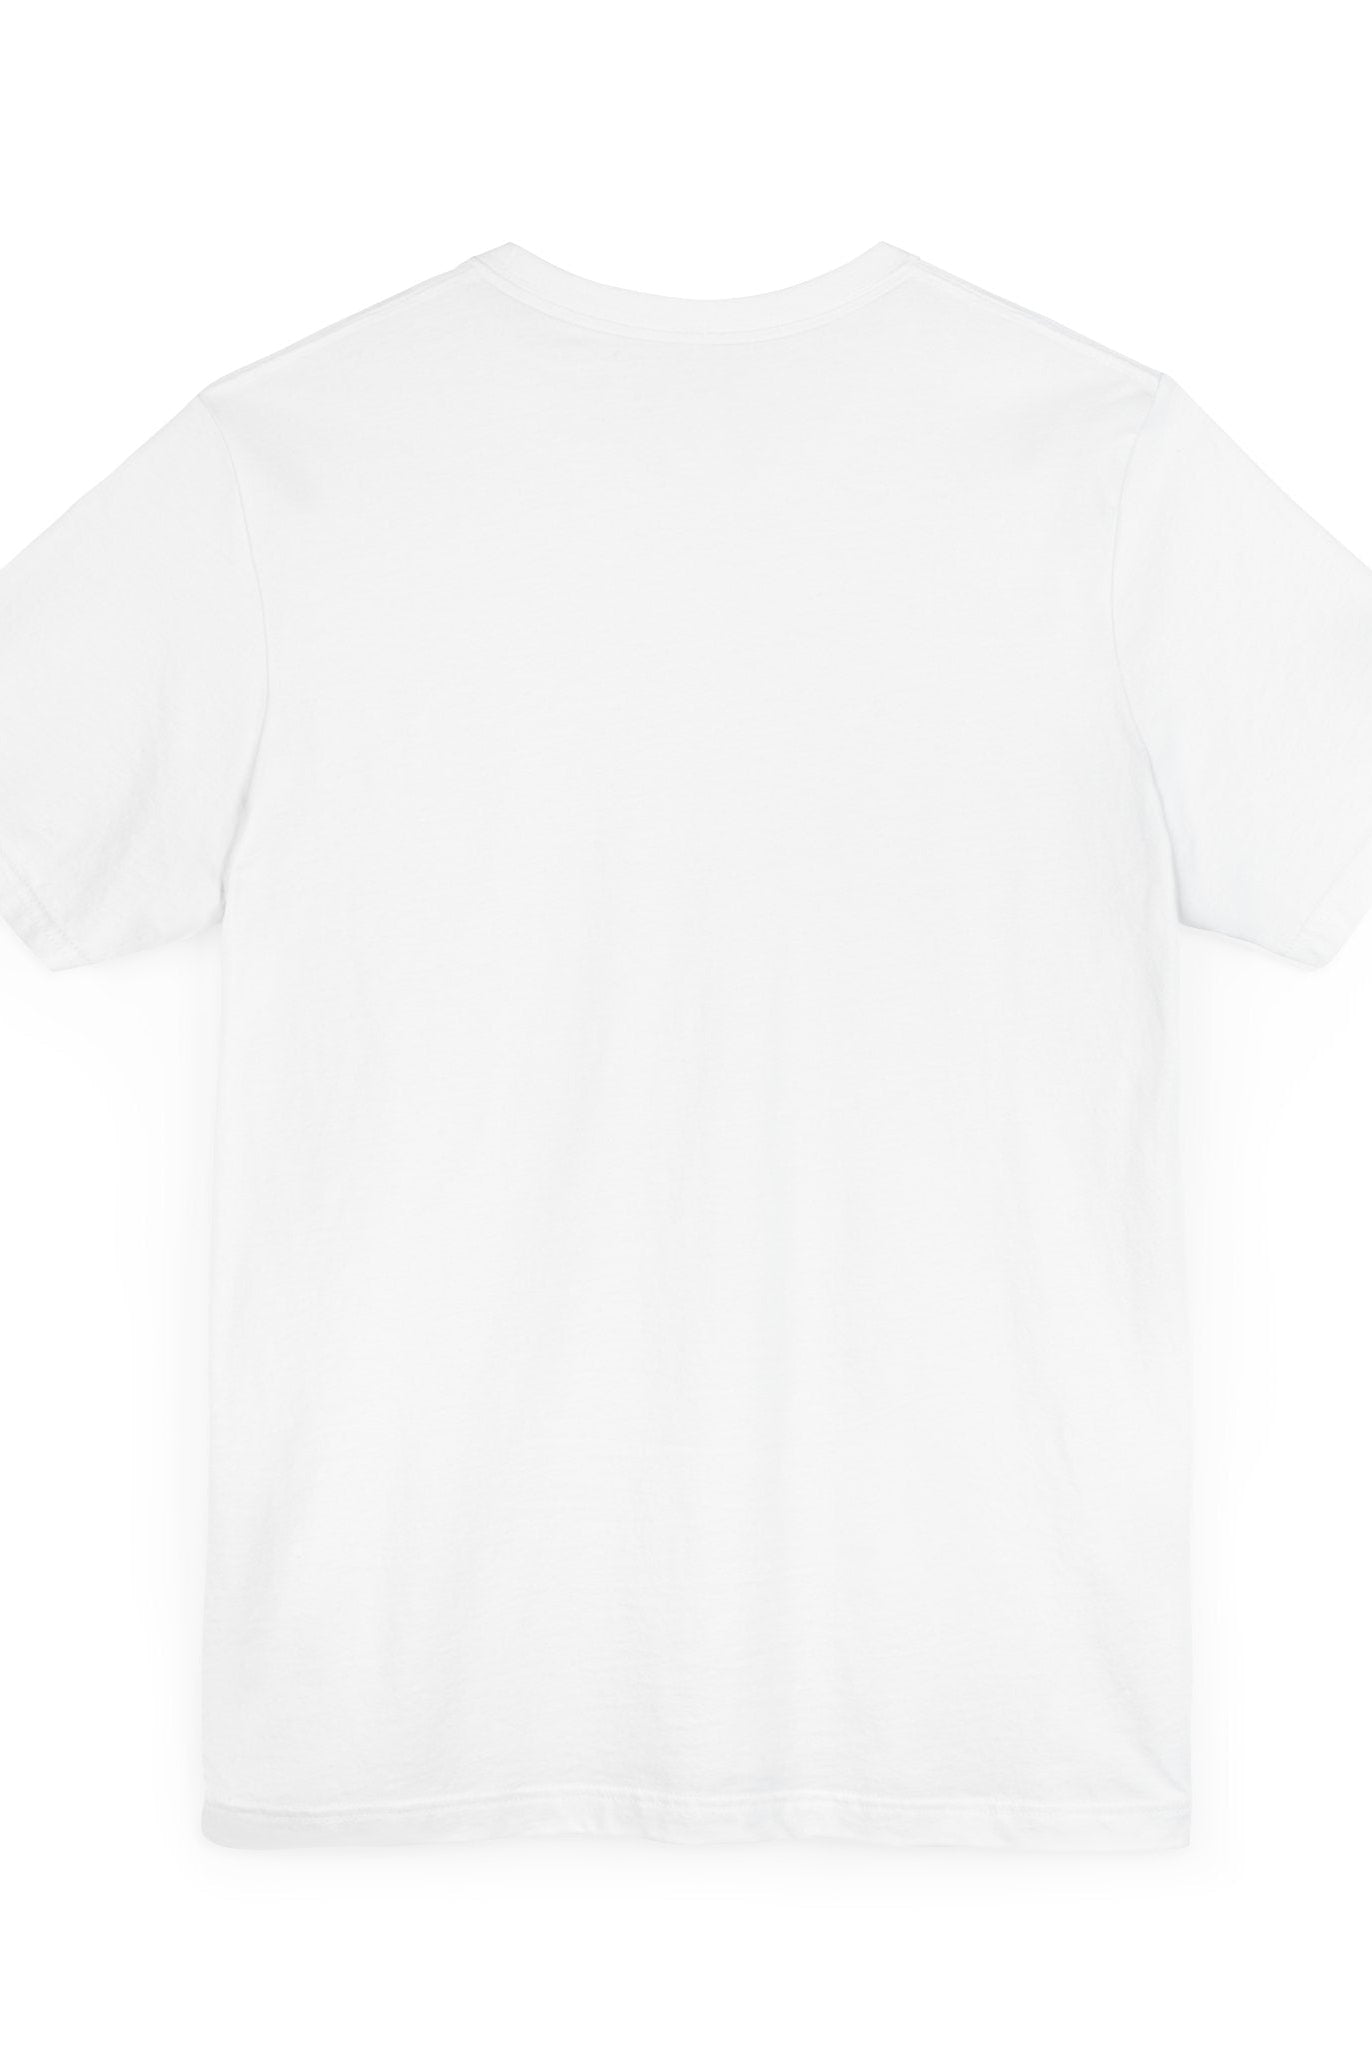 Short-sleeved white t-shirt with crew neck, direct-to-garment printed design